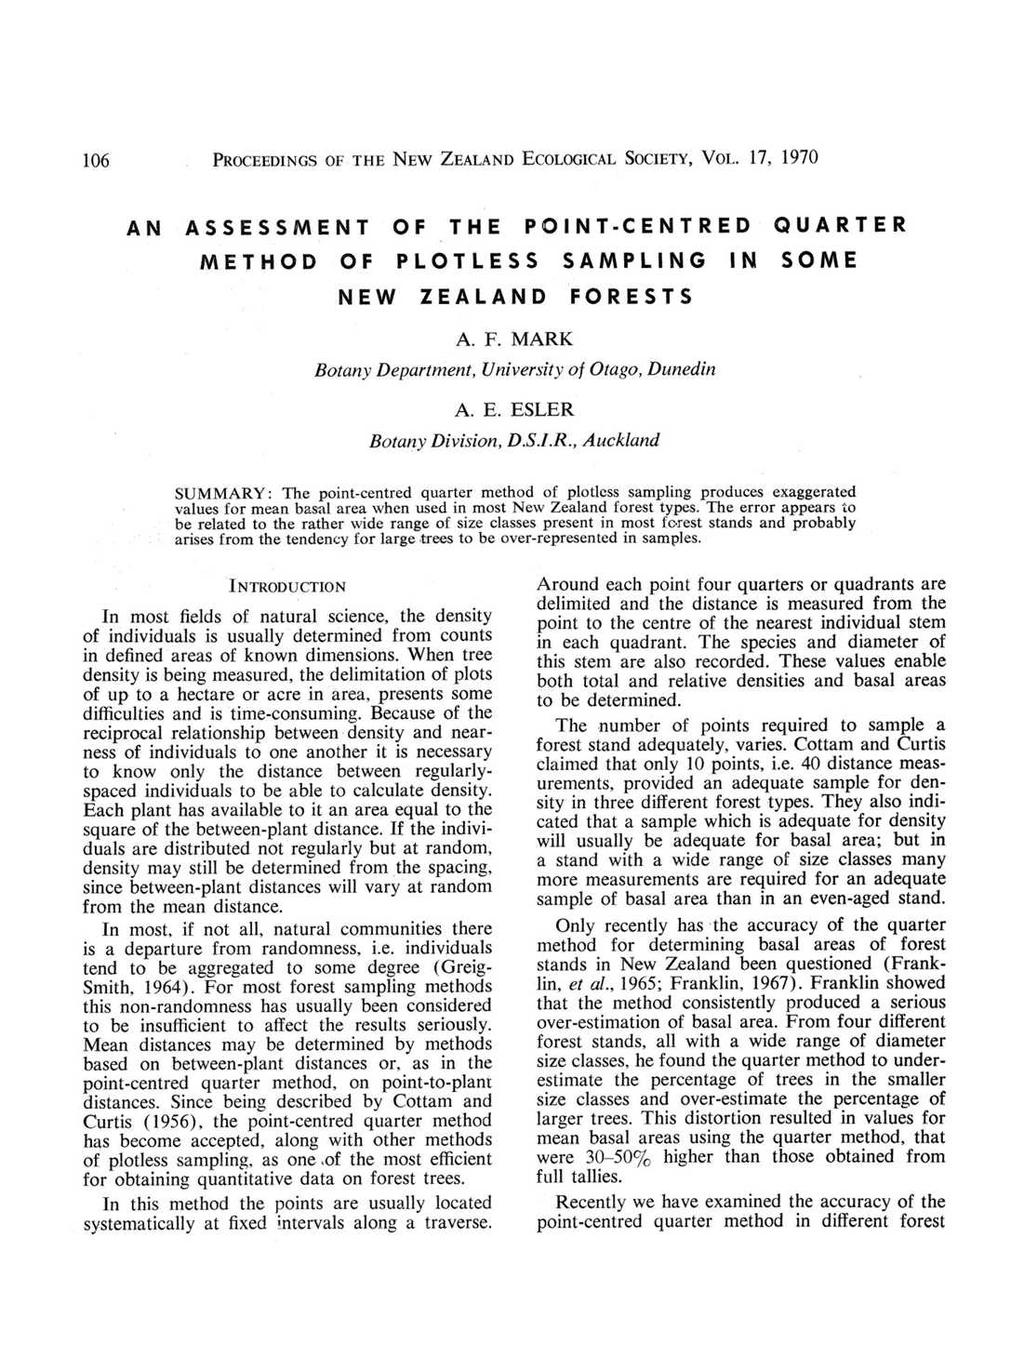 106 PROCEEDINGS OF THE NEW ZEALAND ECOLOGICAL SOCIETY, VOL 17, 1970 AN ASSESSMENT OF THE POINT-CENTRED QUARTER METHOD OF PLOTLESS SAMPLING IN SOME NEW ZEALAND FORESTS A F MARK Botany Department,